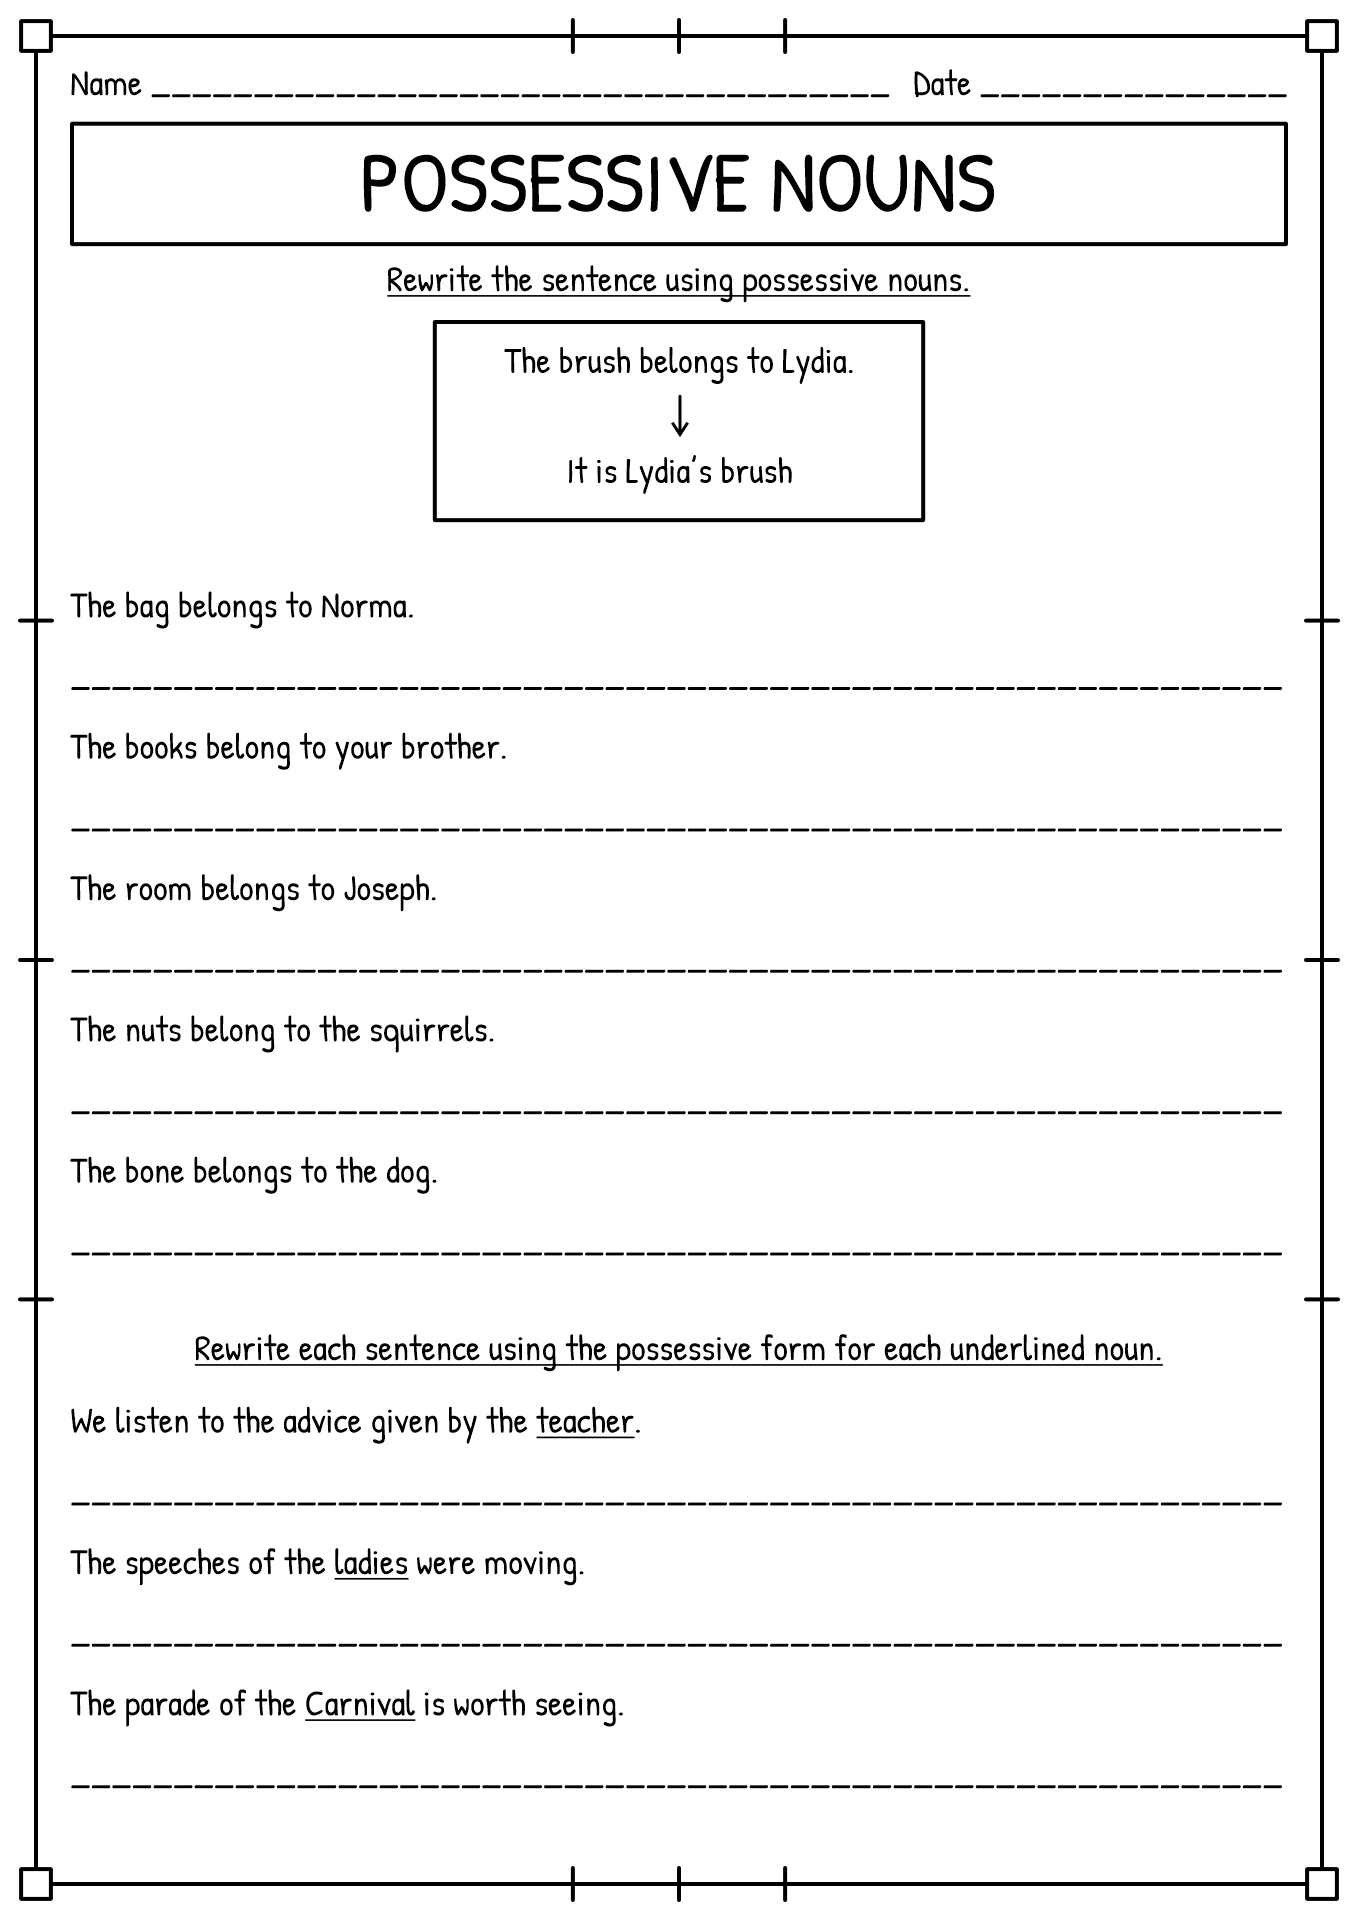 17 Best Images of Different Kinds Of Nouns Worksheet - Different Types